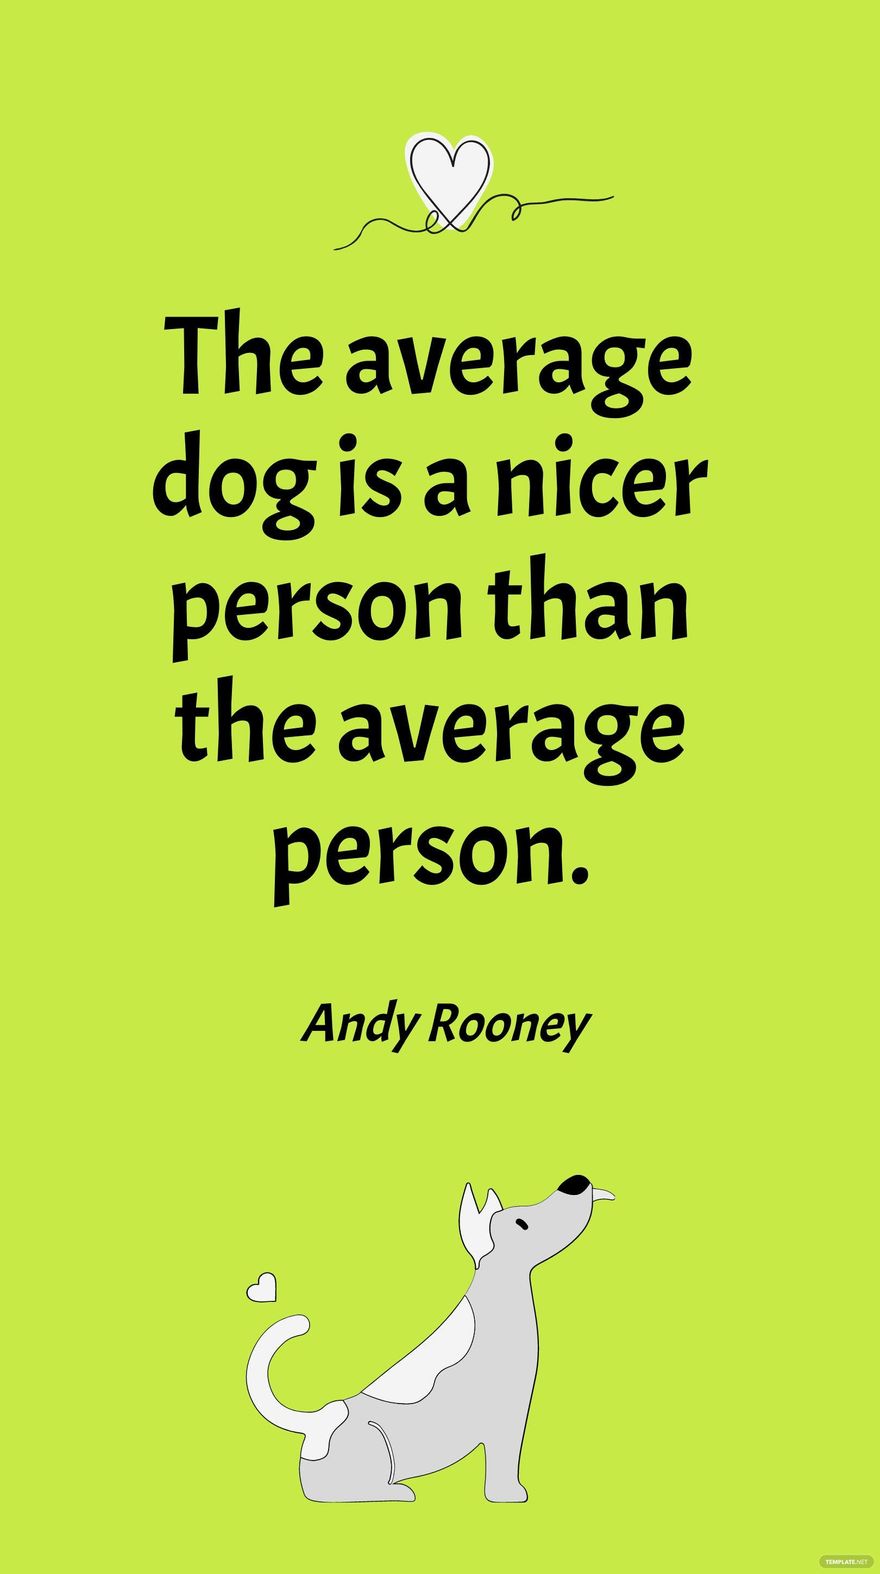 Andy Rooney - The average dog is a nicer person than the average person.